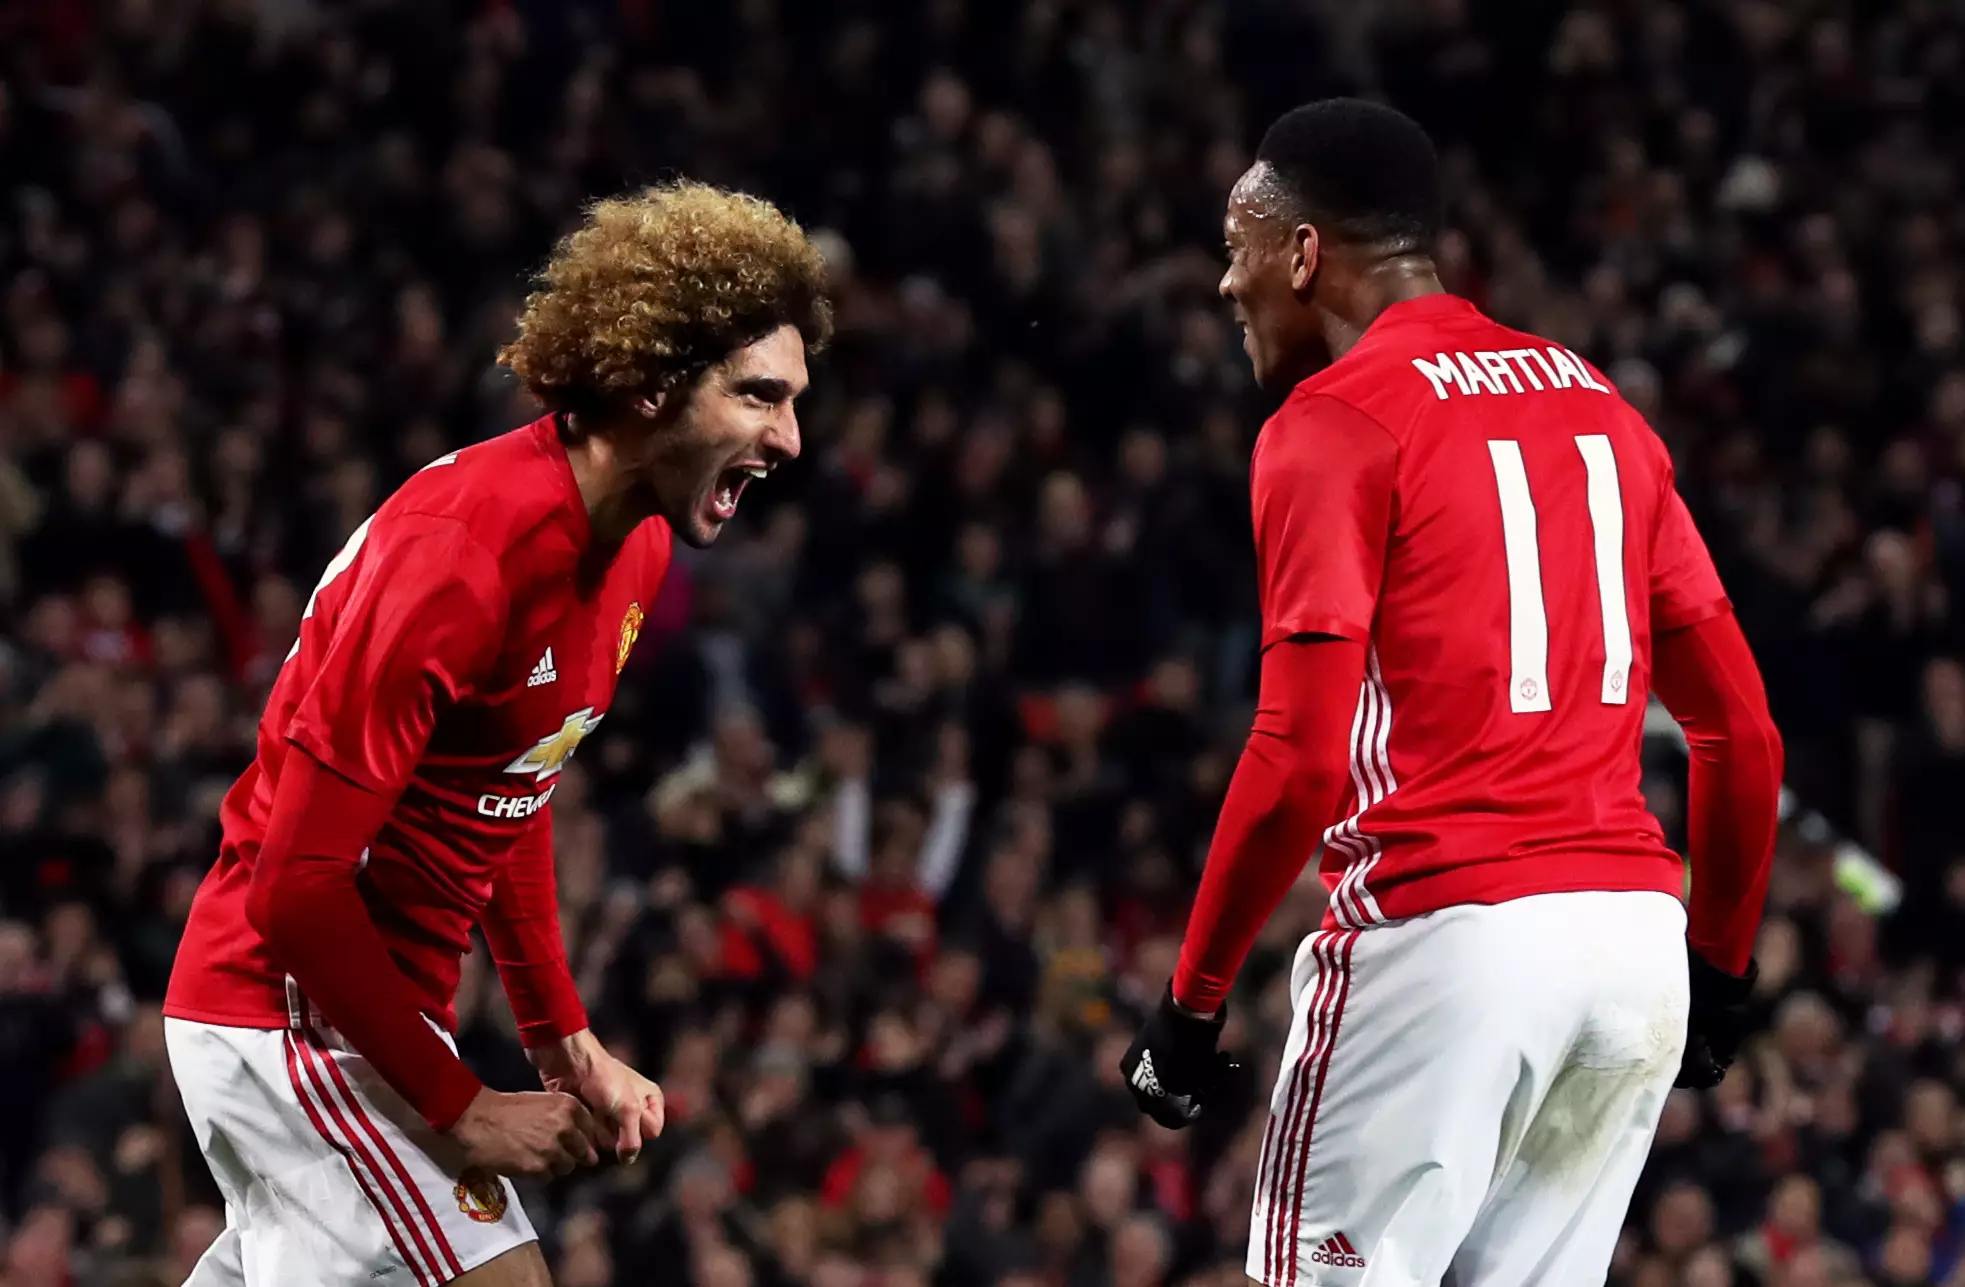 Fellaini may have his fair share of doubters, but the Belgian has proven to be a useful player for United over the last five years. Images: PA